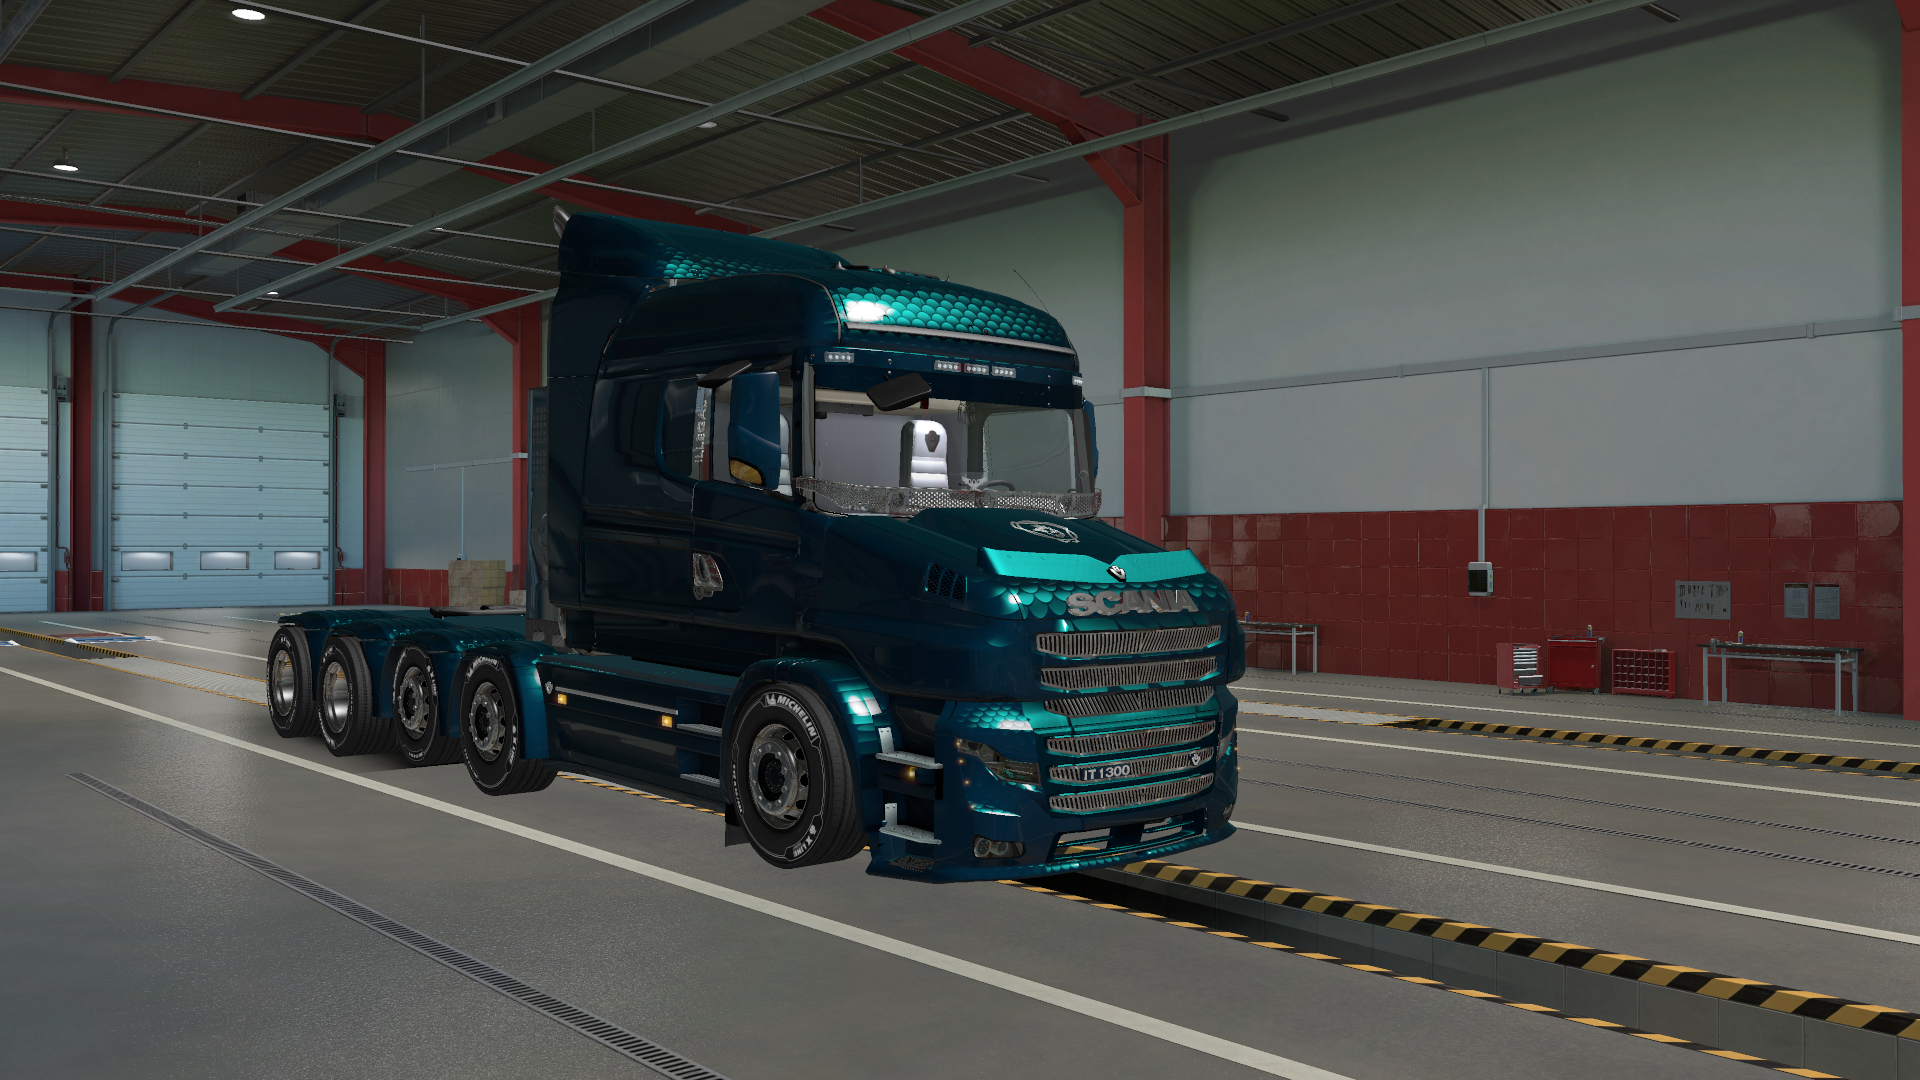 ets2_20210226_230211_00.png